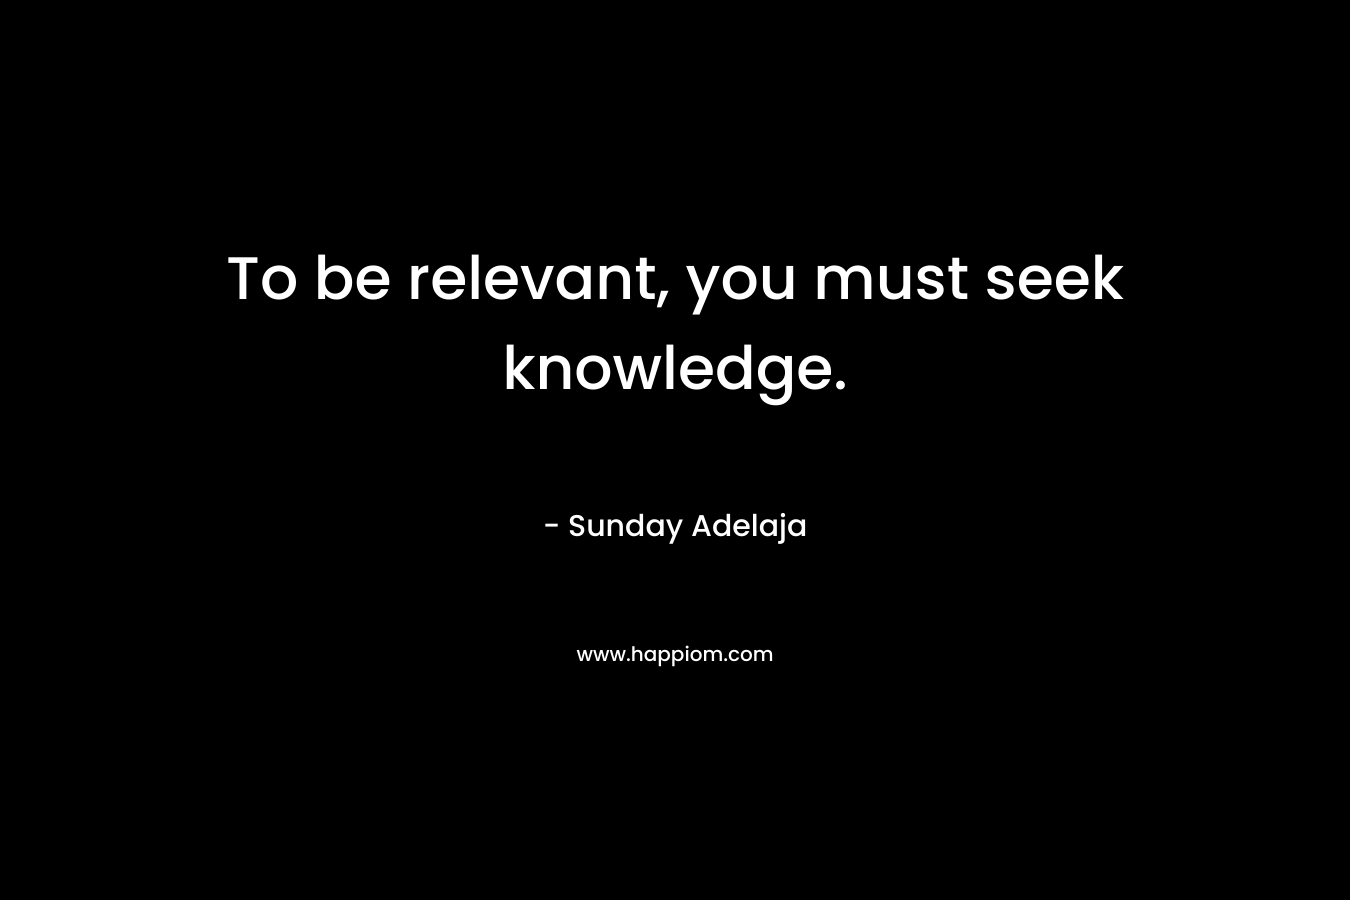 To be relevant, you must seek knowledge.